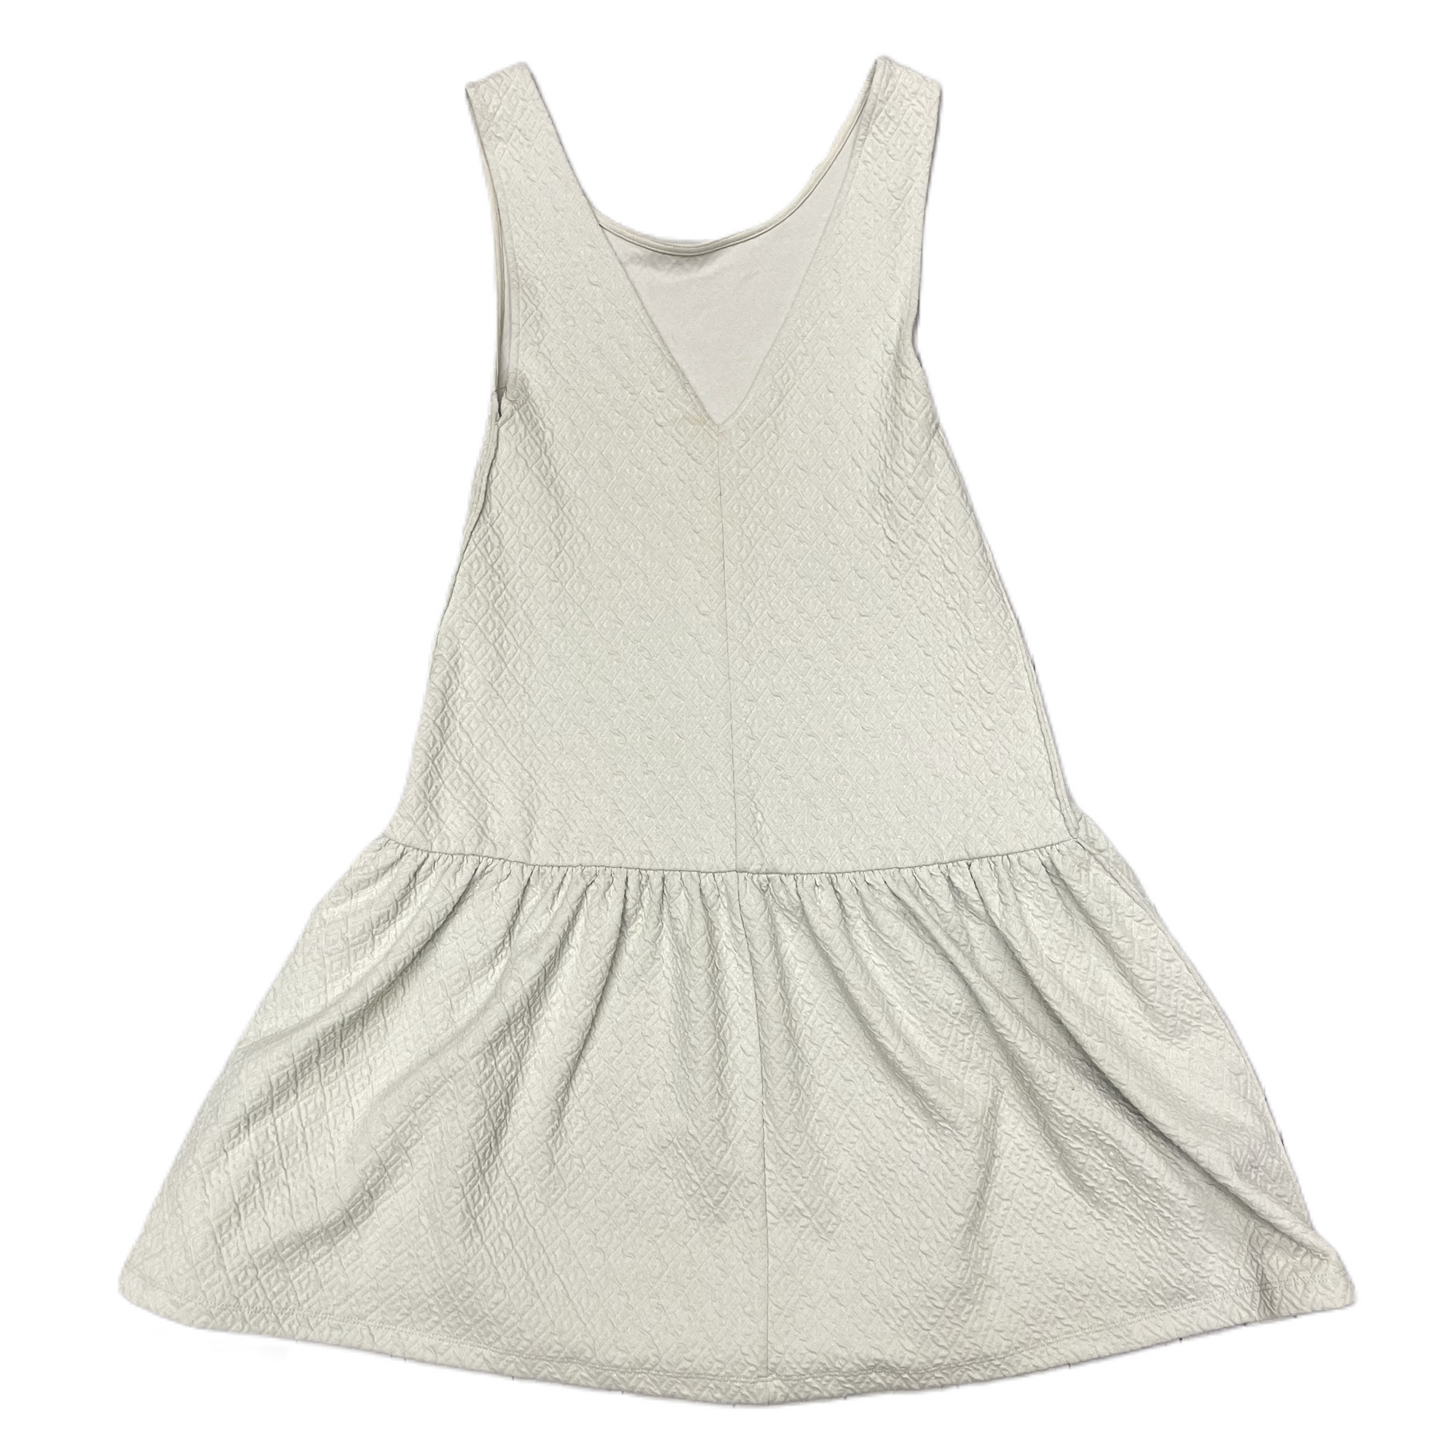 Grey Dress Casual Short By Free People, Size: S